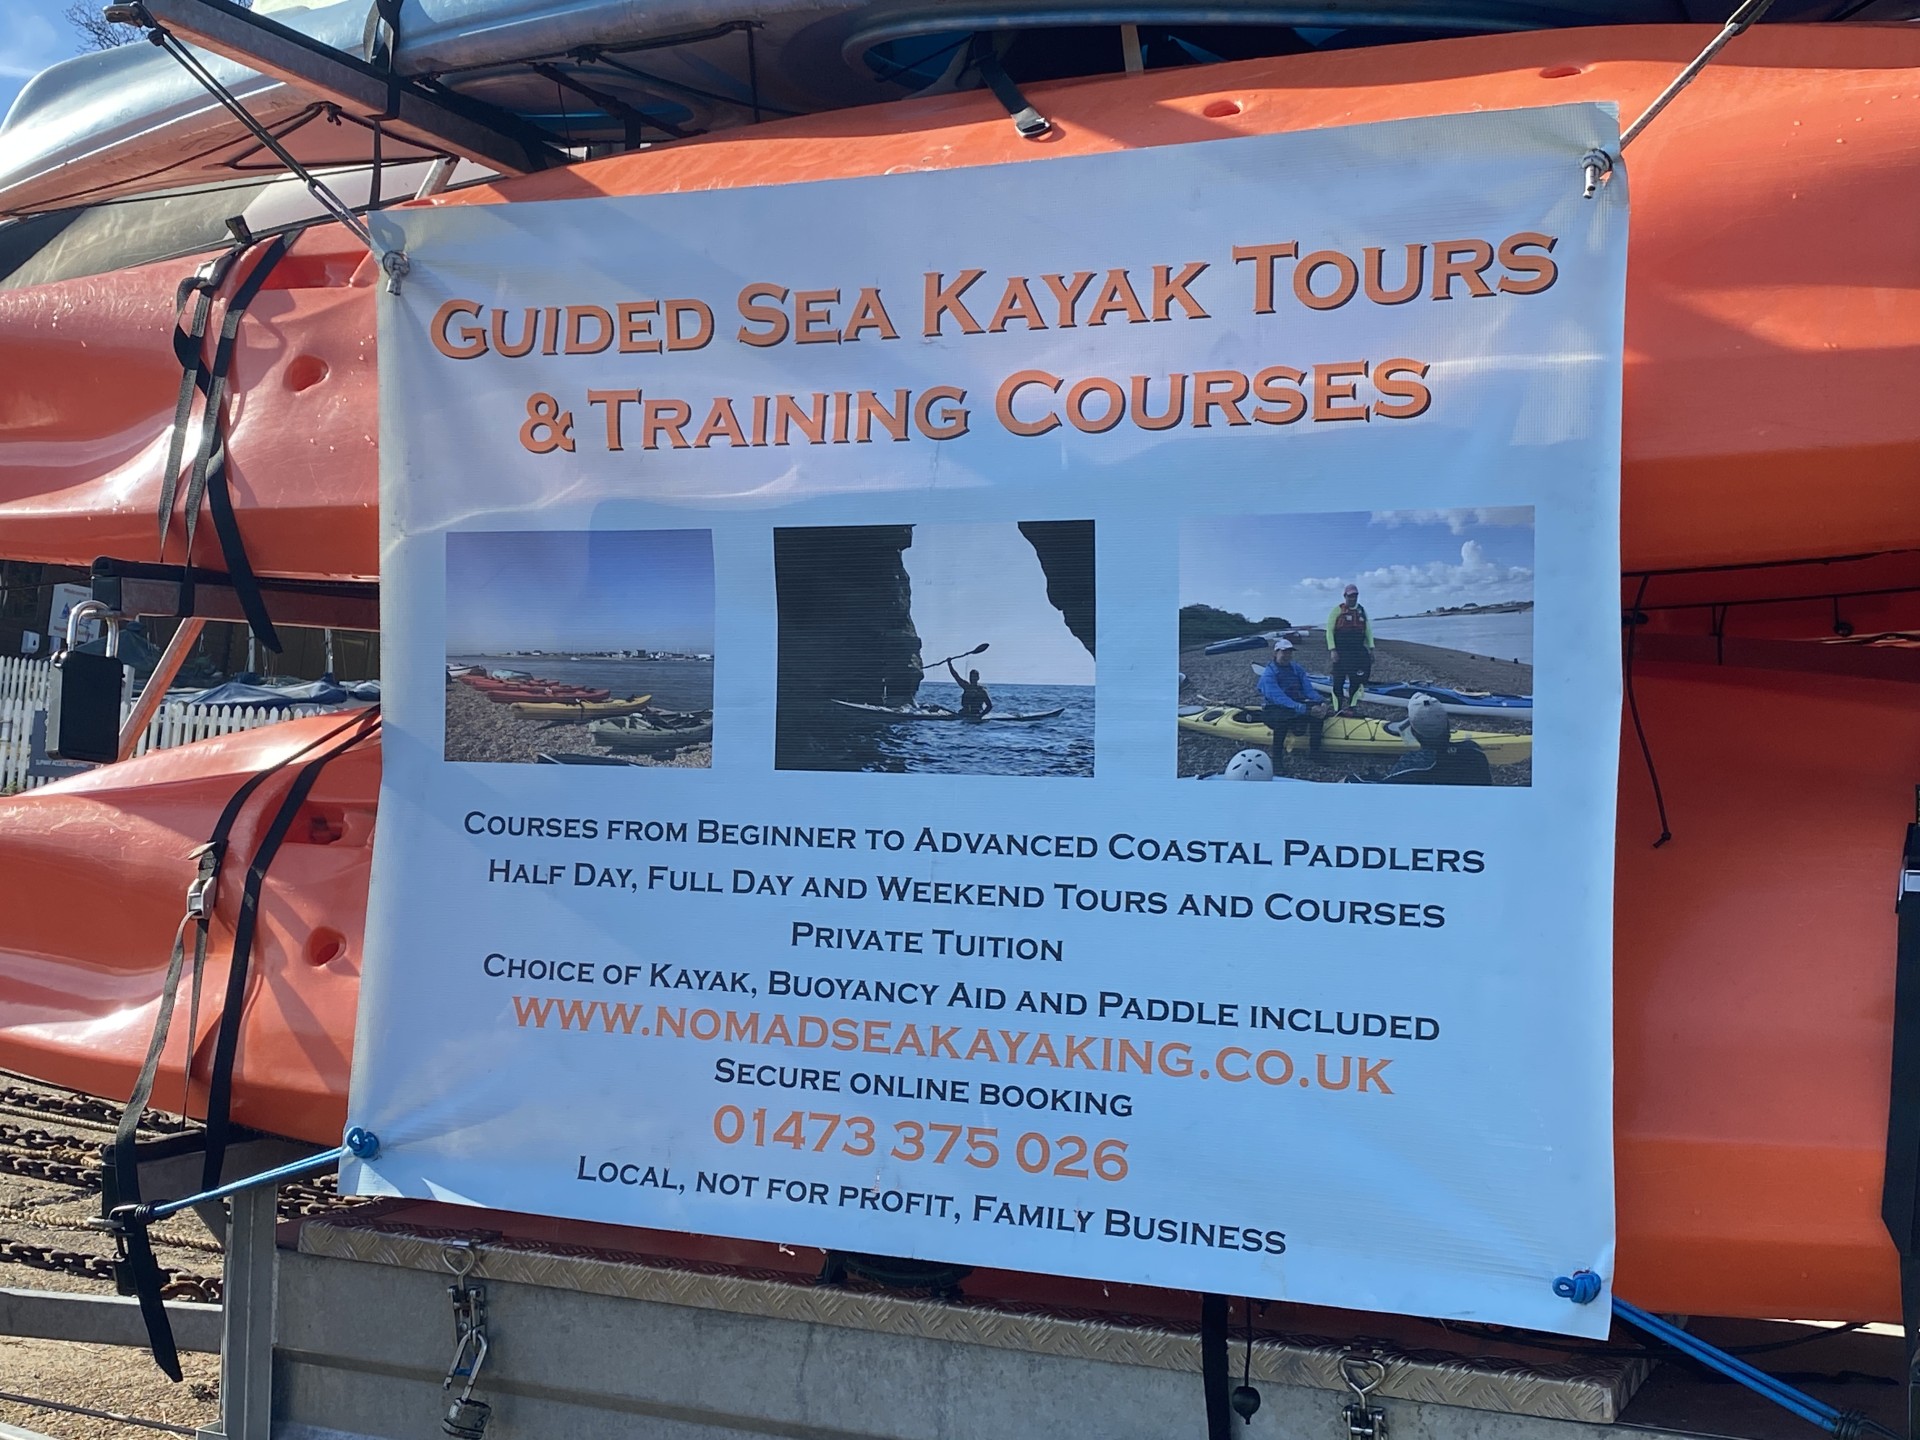 Guided sea kayak tours & training courses with NOMAD Sea Kayaking.